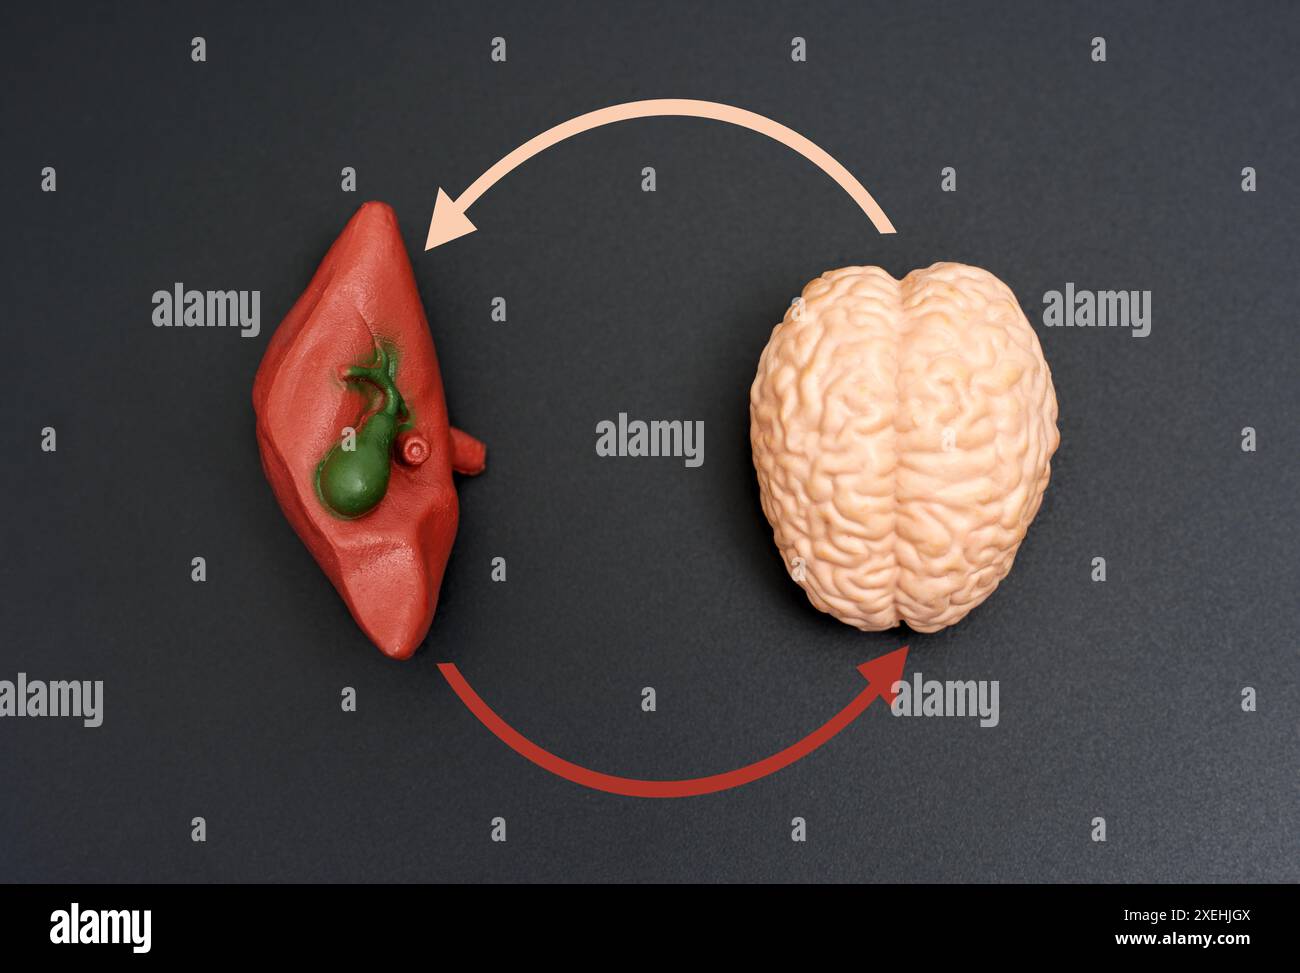 Miniature anatomical liver and brain models with red and beige circular arrows on black surface. Health interaction concept. Stock Photo